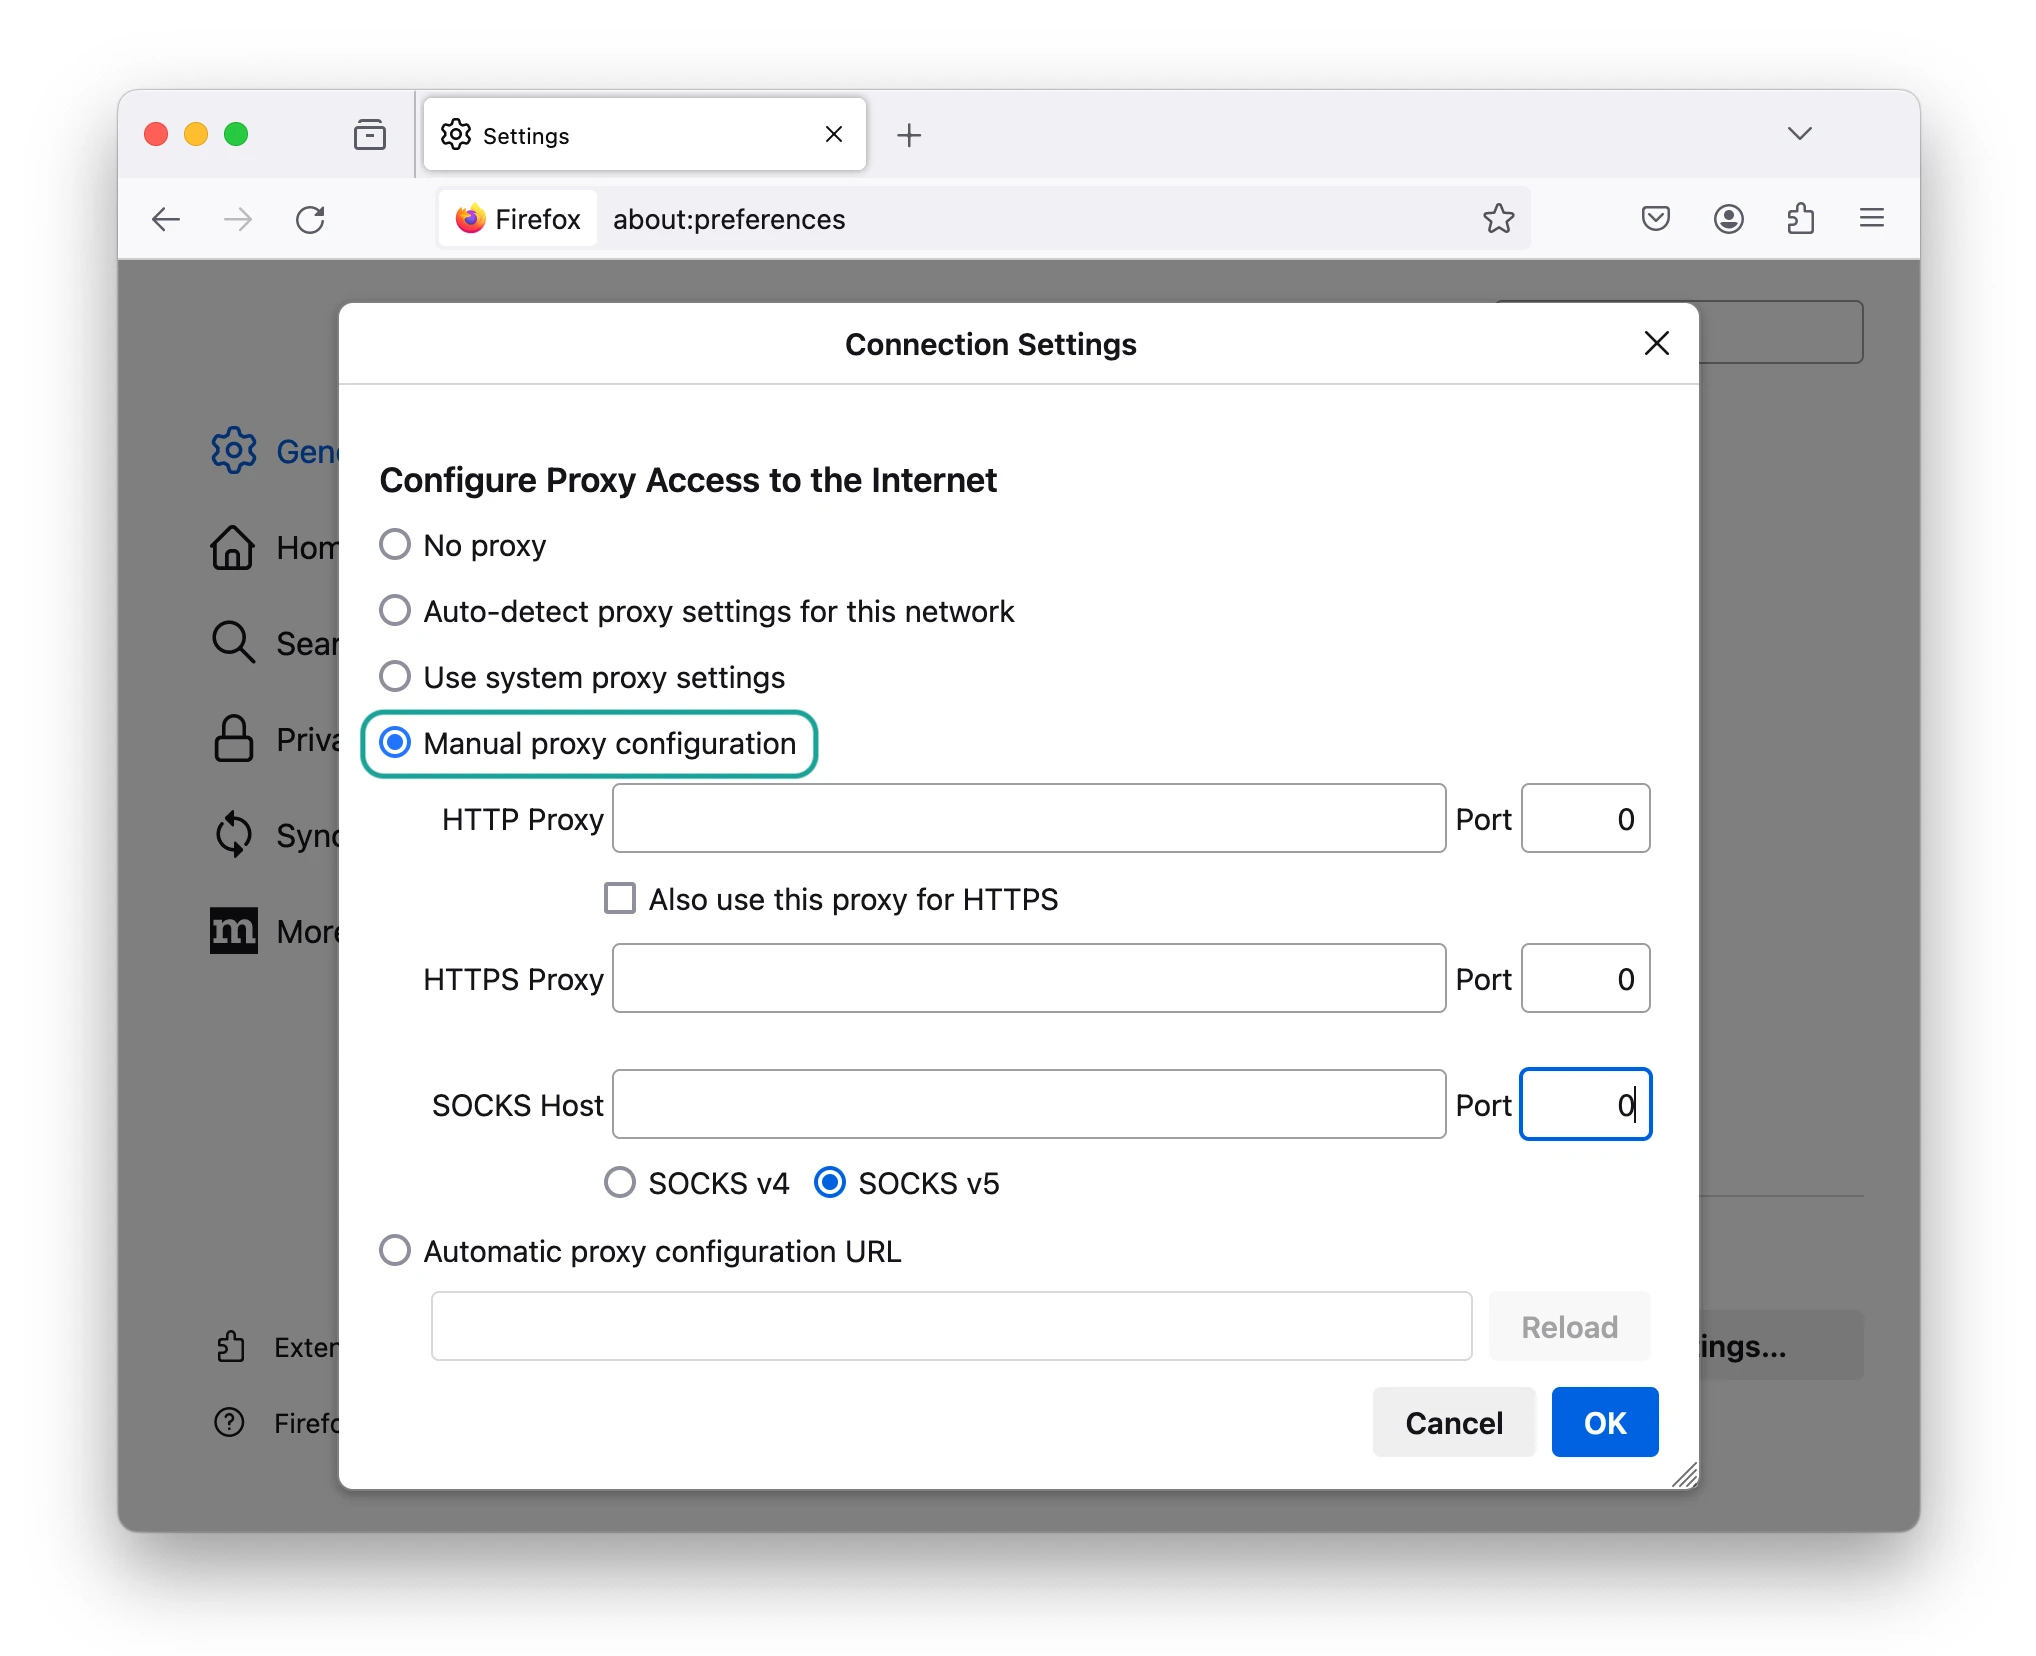 Firefox connection settings with manual proxy configuration highlighted